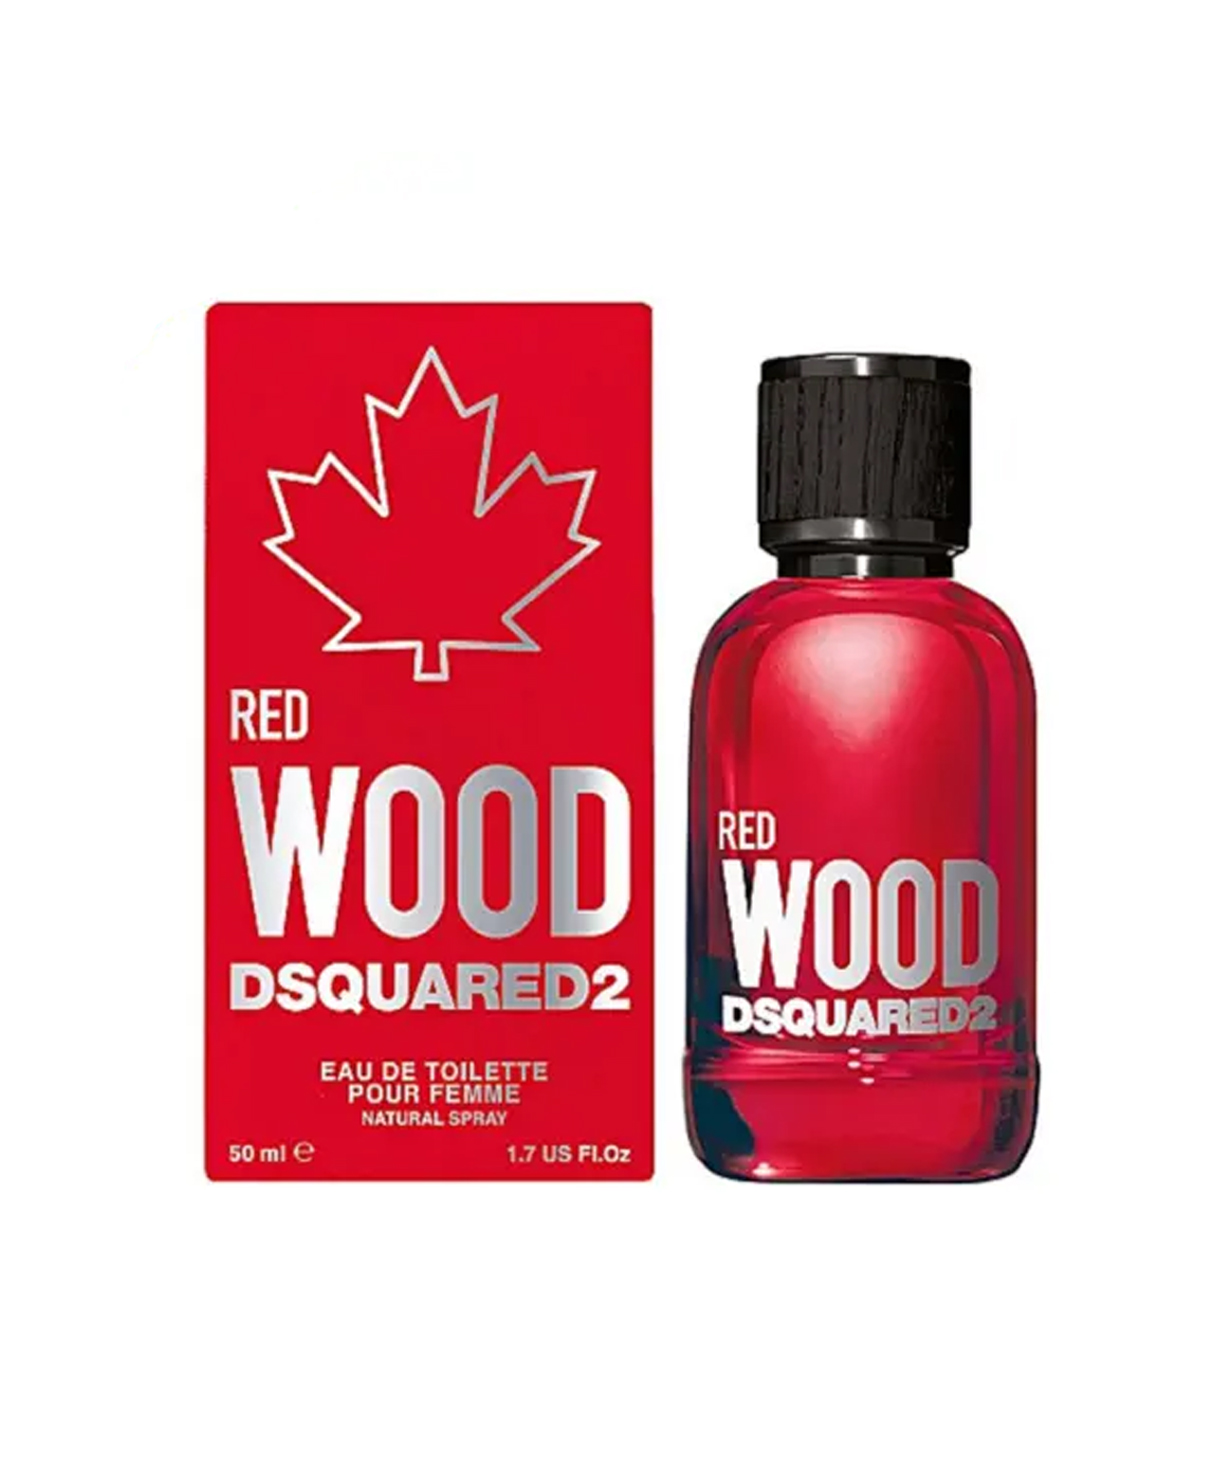 Perfume «Dsquared2» Red Wood, for women, 50 ml